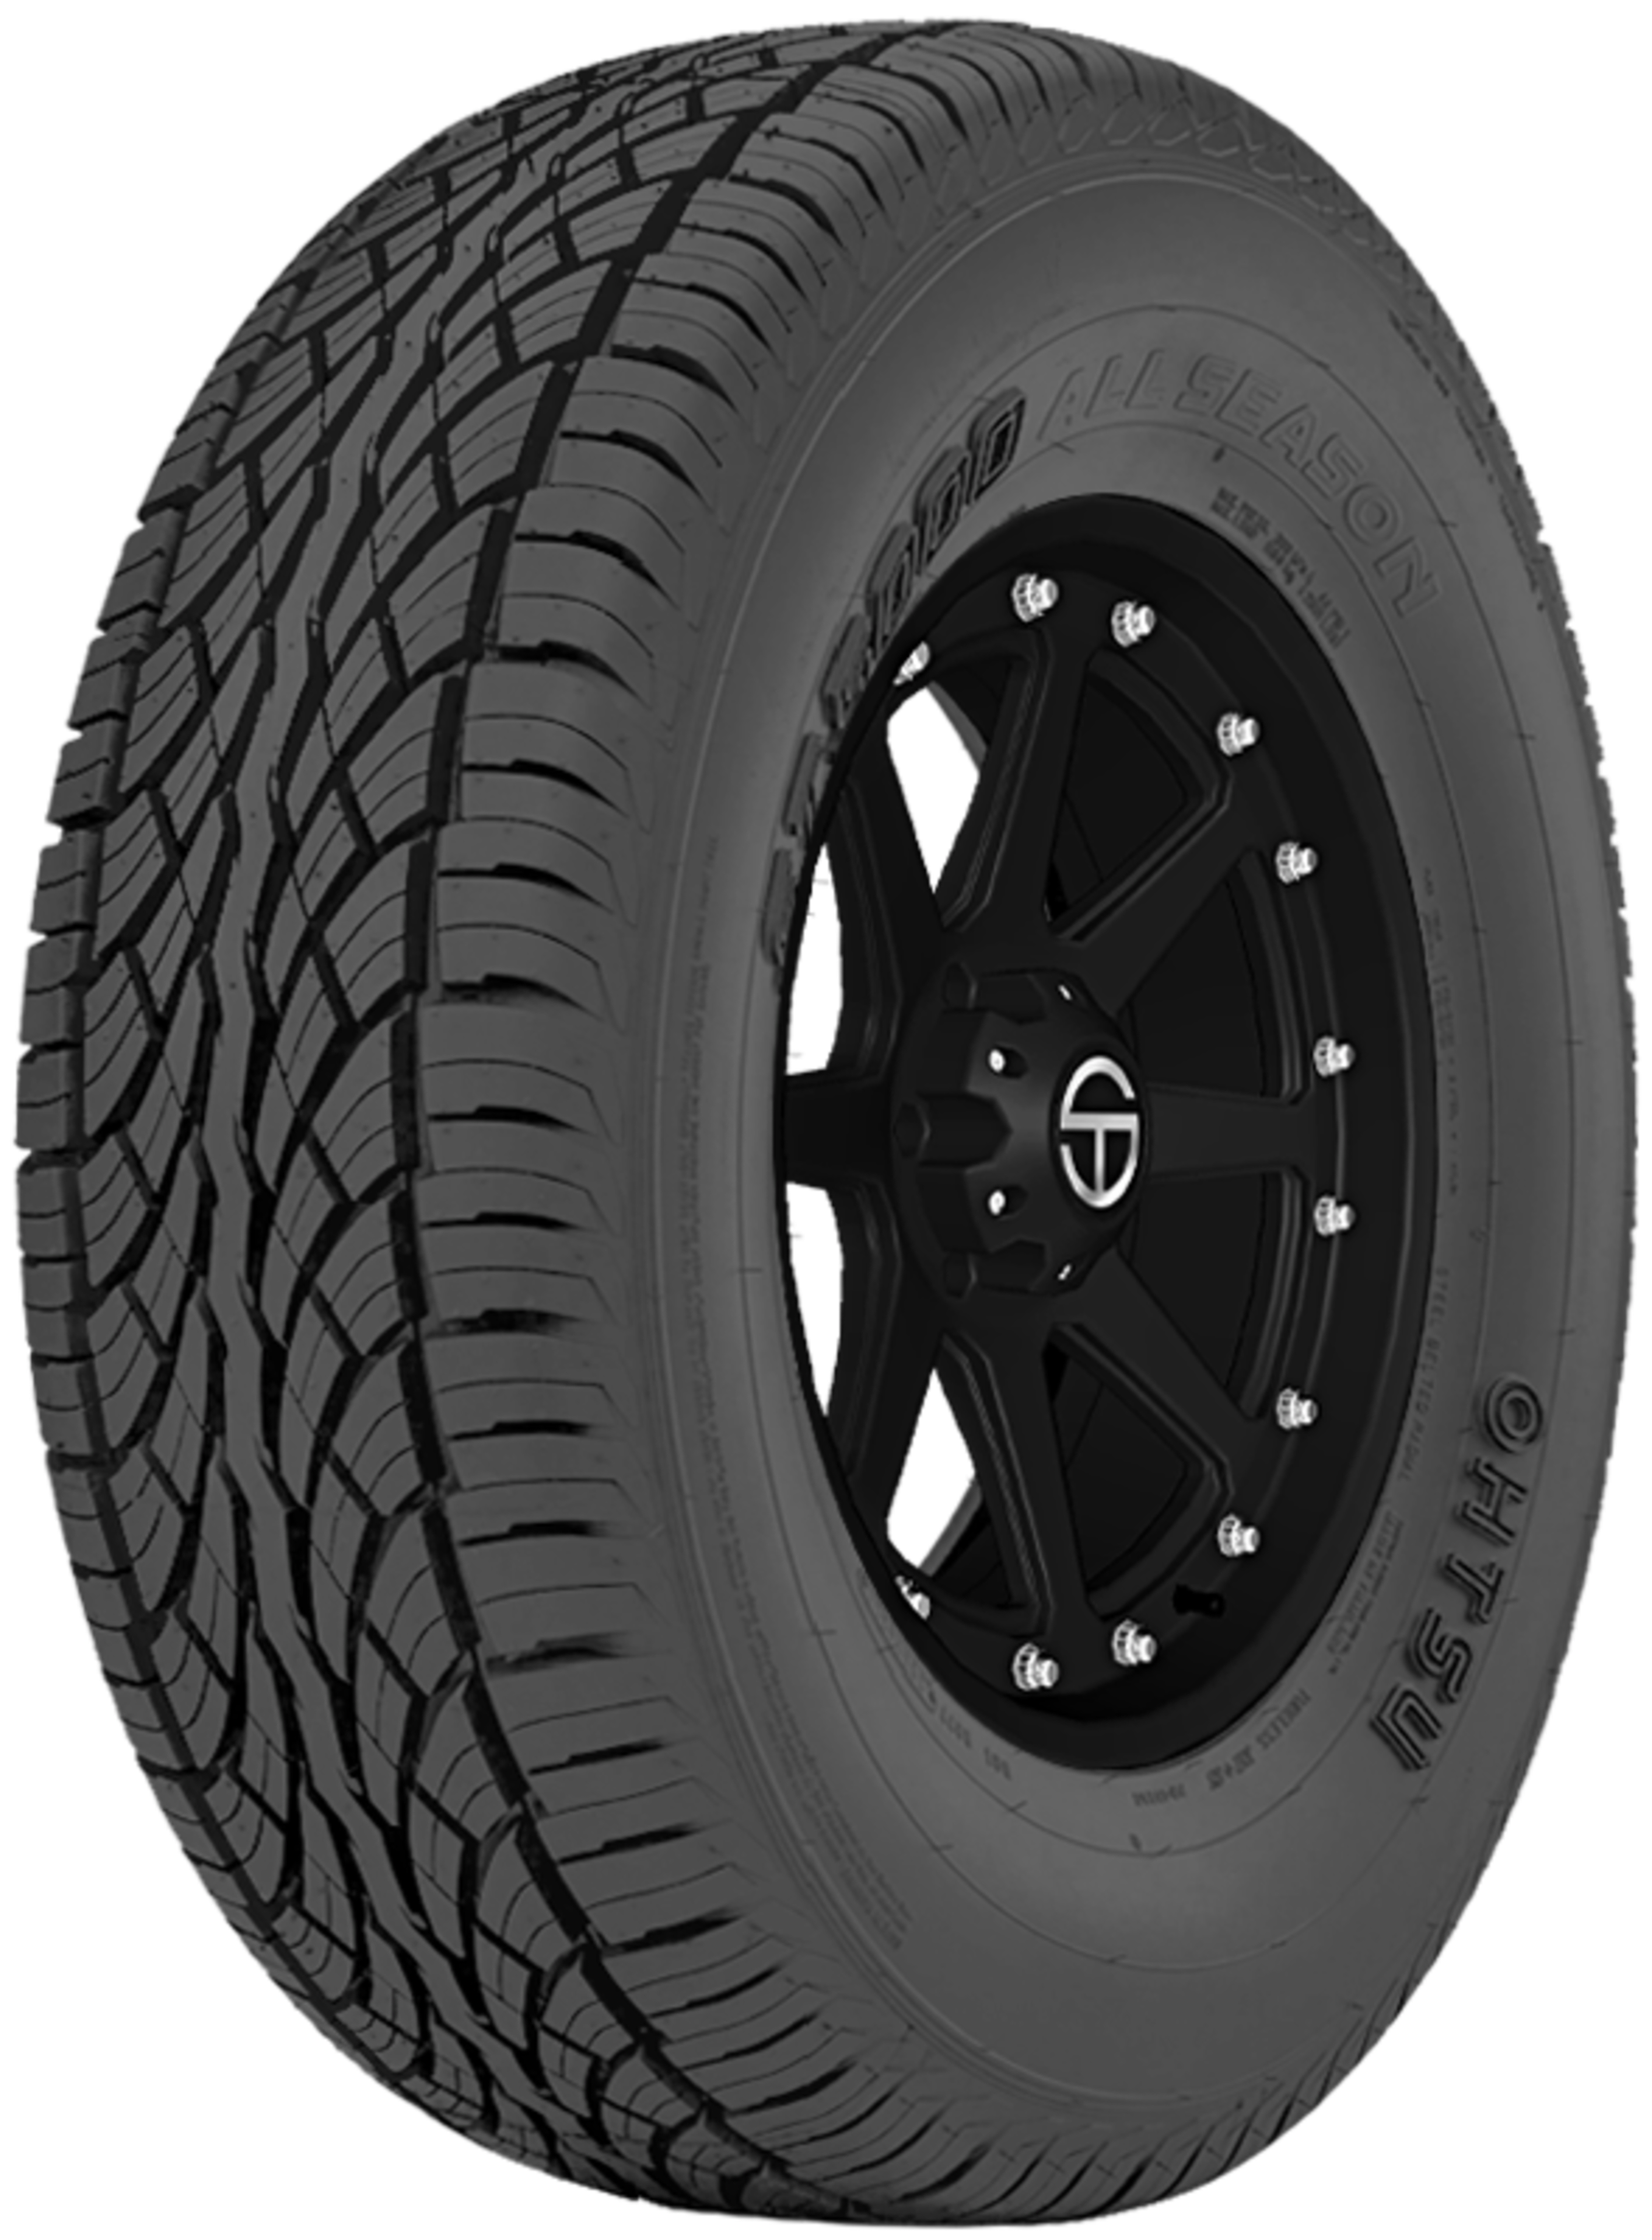 Shop for 265/35ZR22 Tires for Your Vehicle | SimpleTire